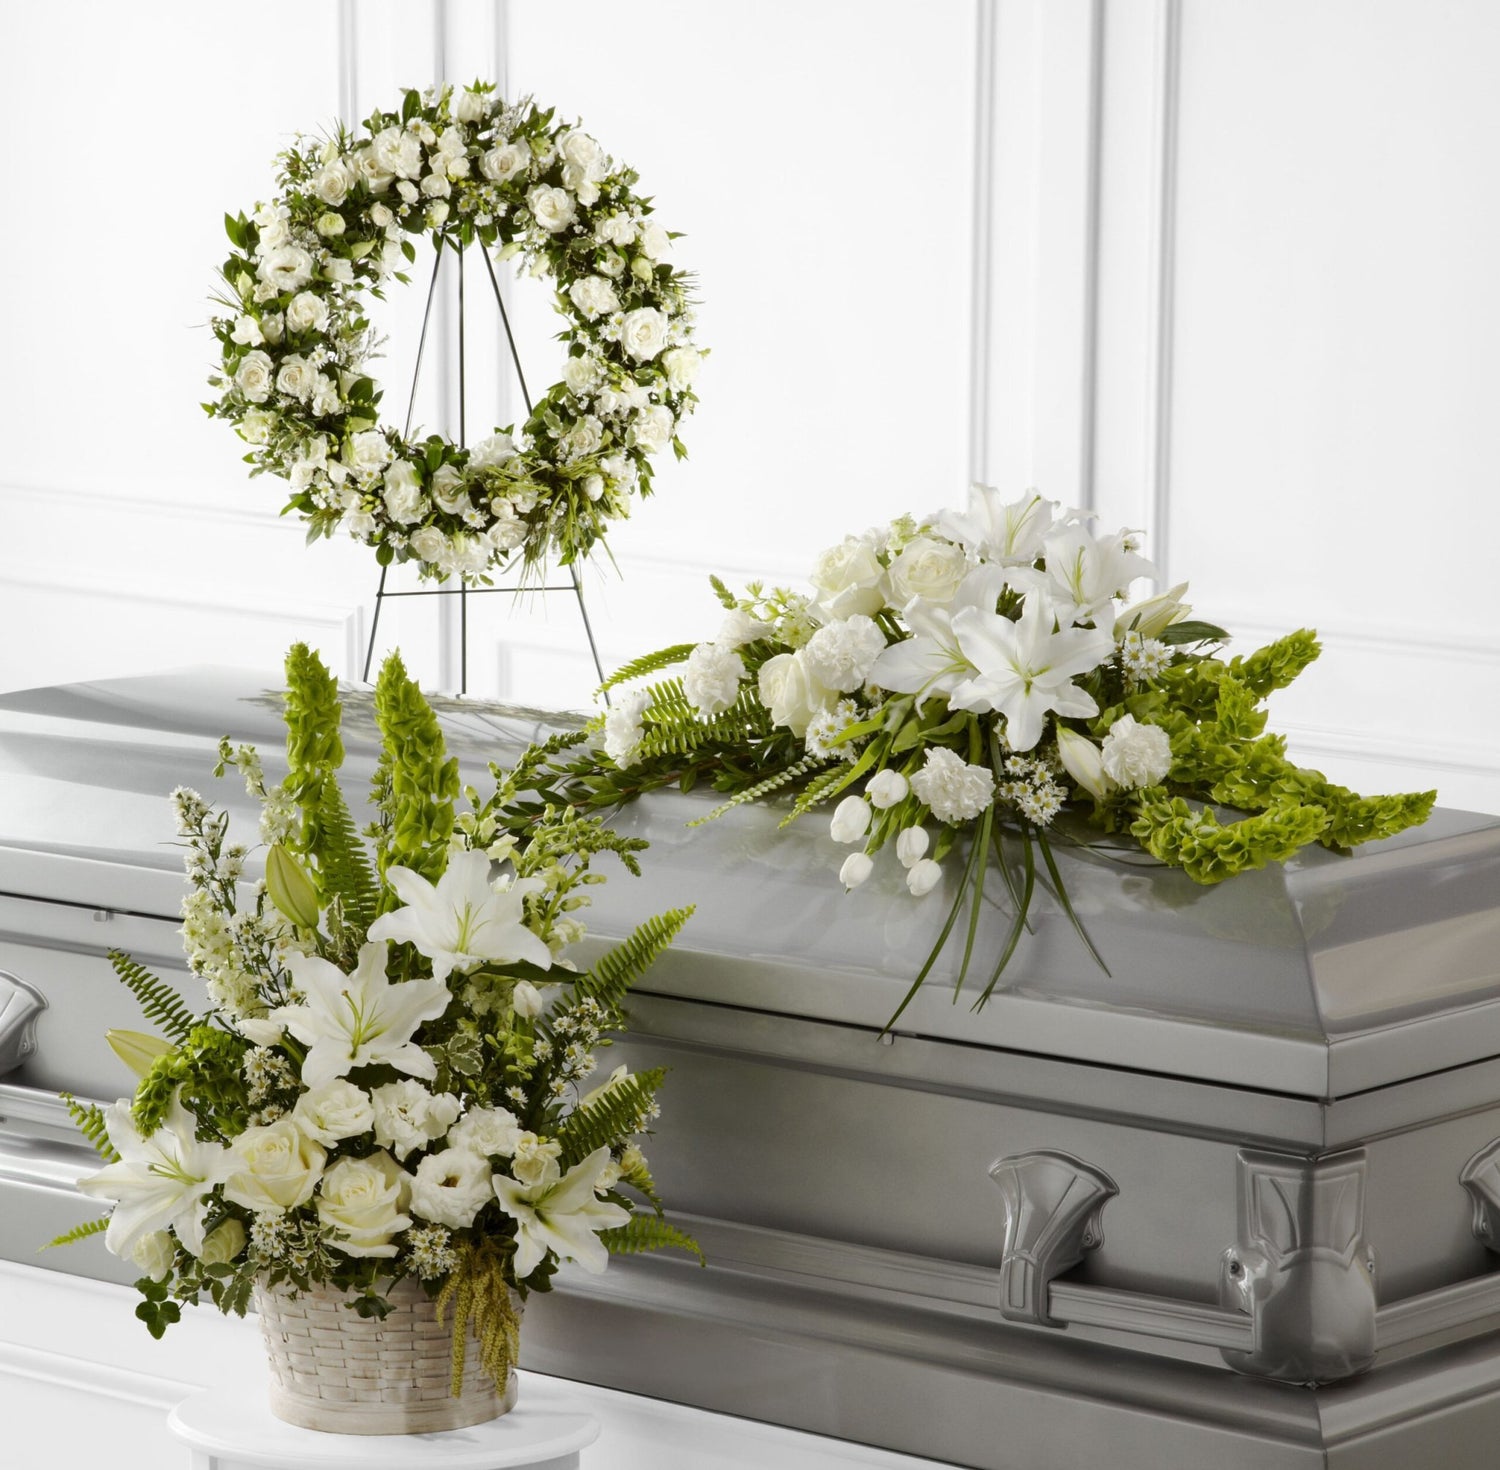 Funeral Casket Covers - Queens Flower Delivery